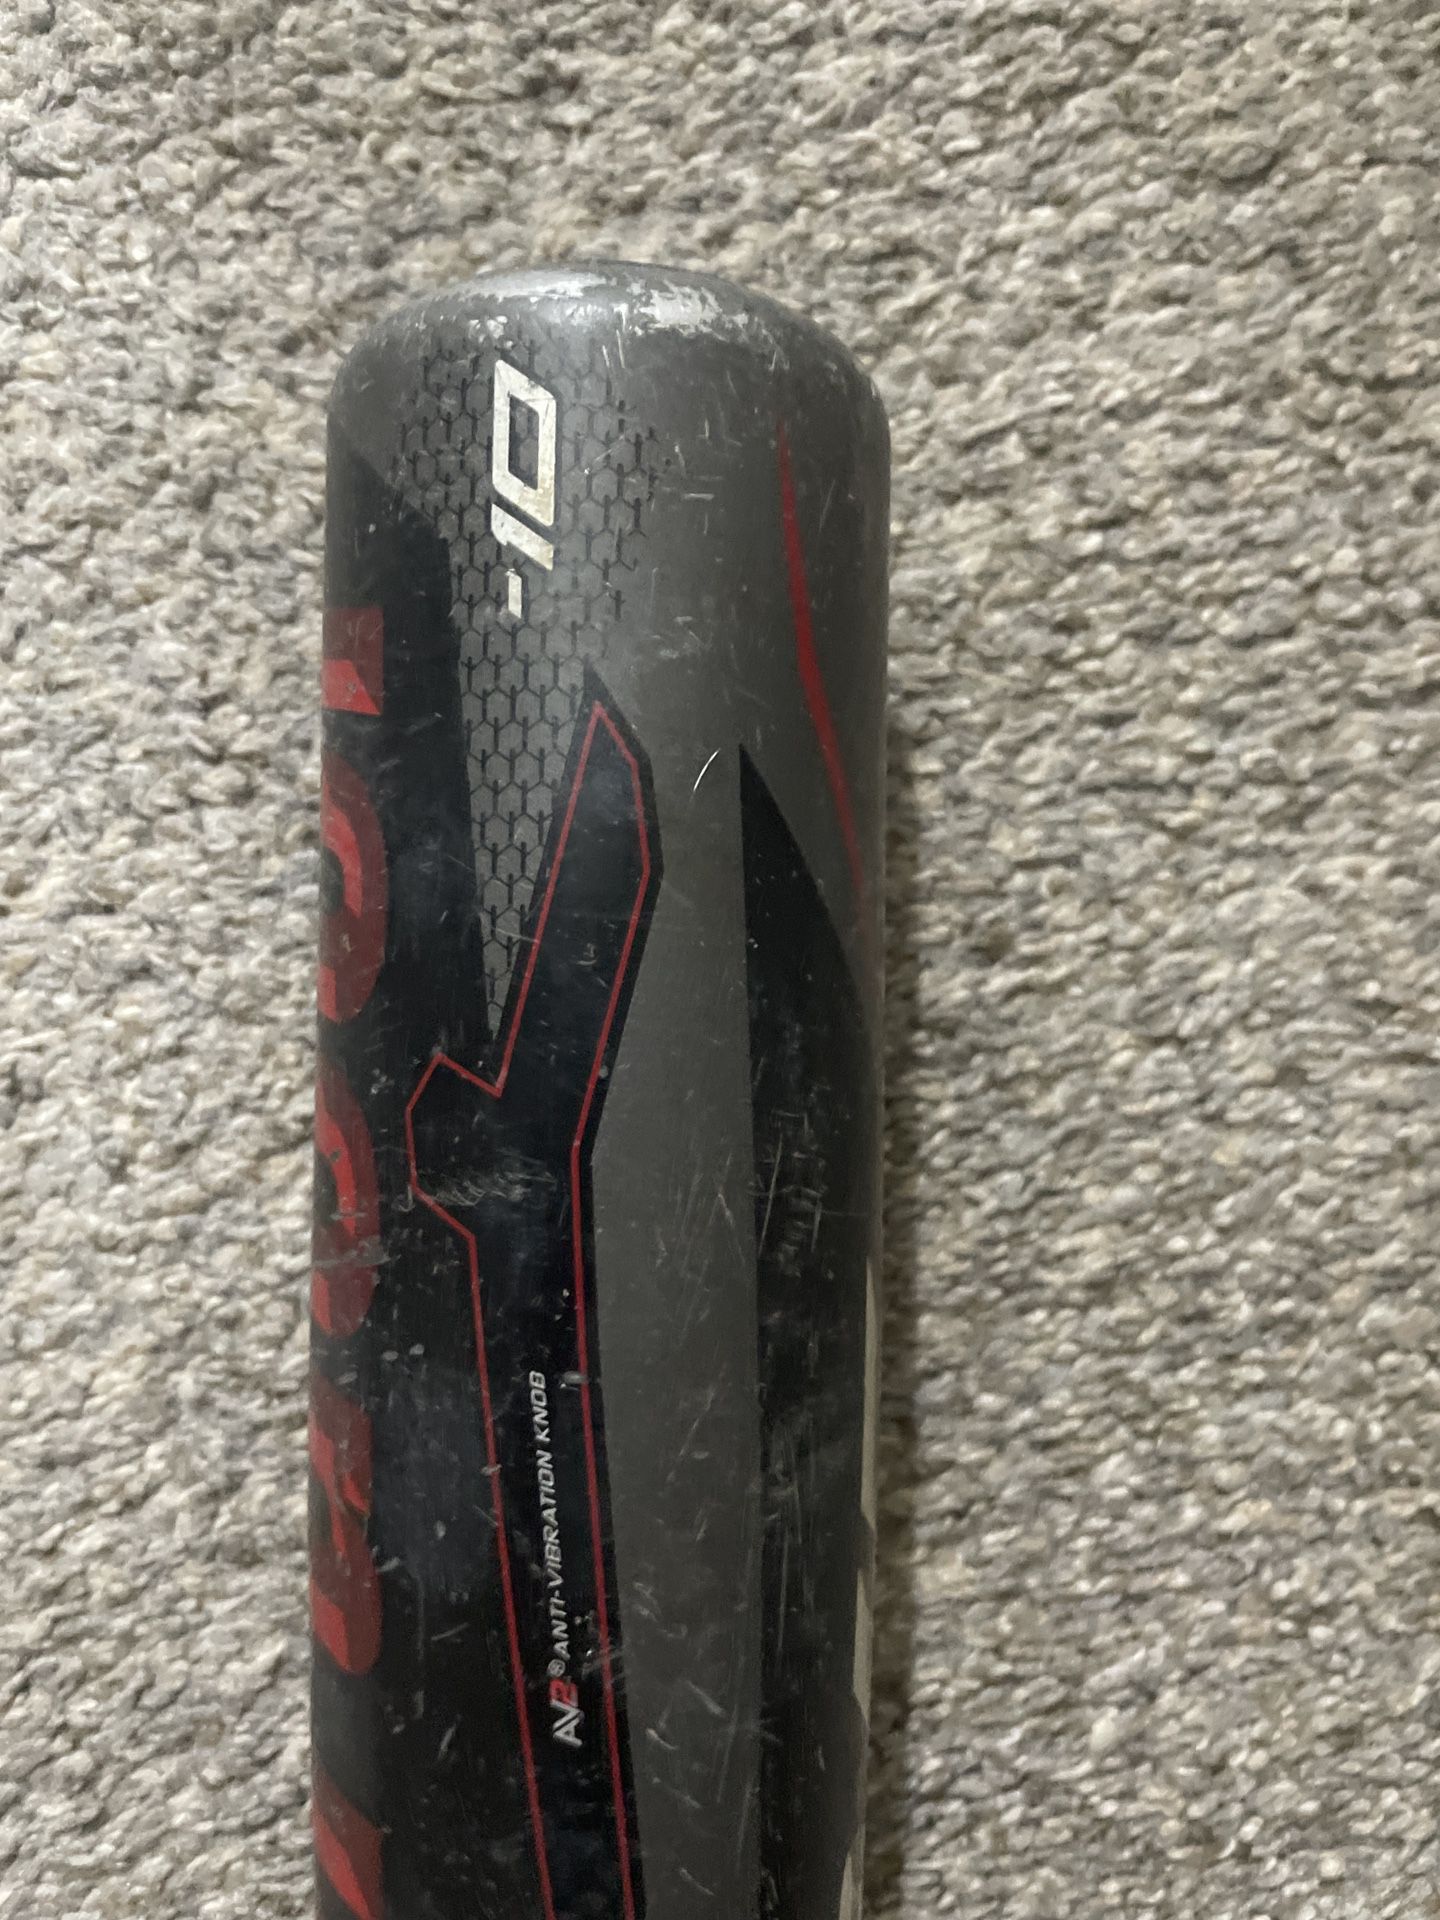 Marucci Cat9 One Piece Used